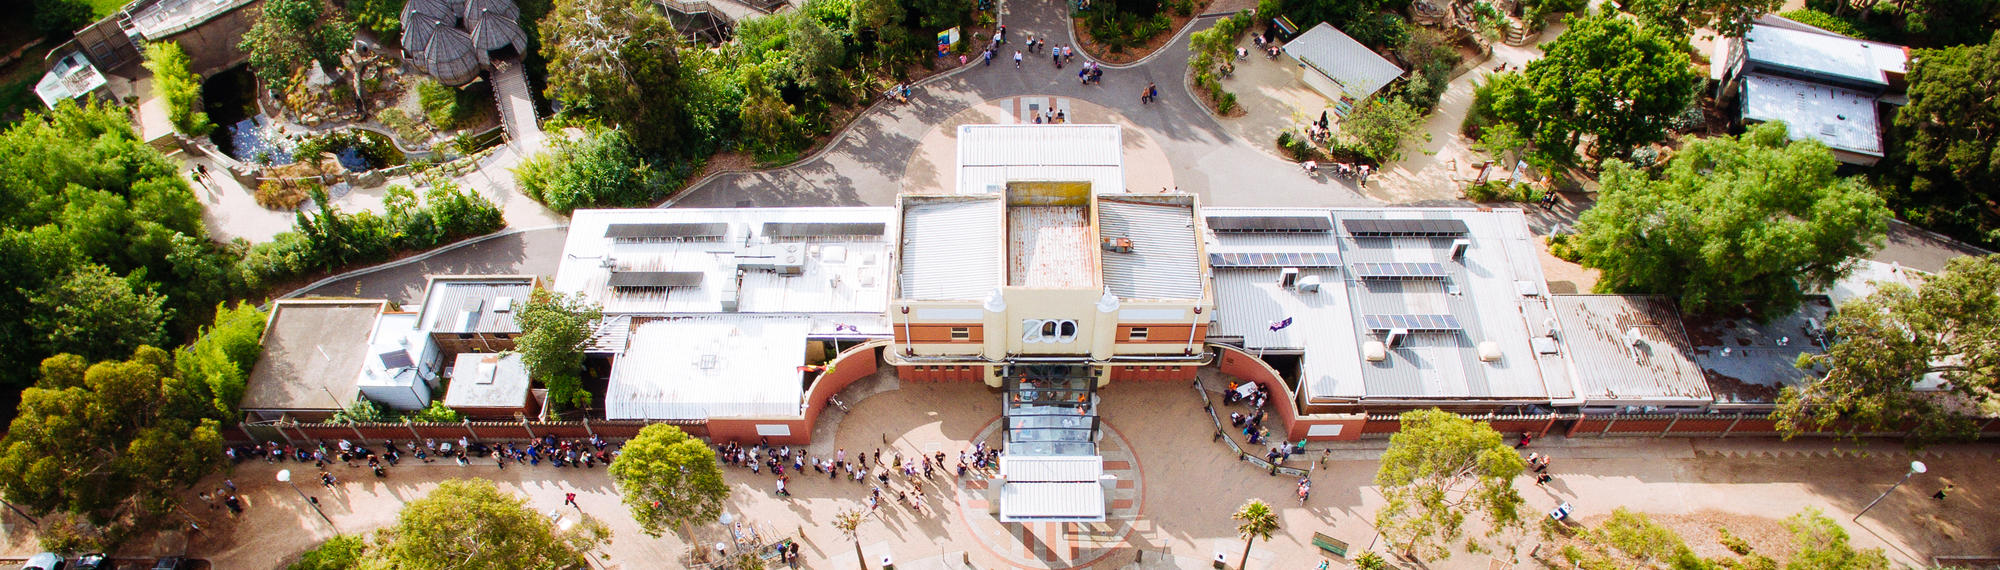 A birds eye view of the Main Gate entrance at Melbourne Zoo. There are people lining up to enter the zoo. 